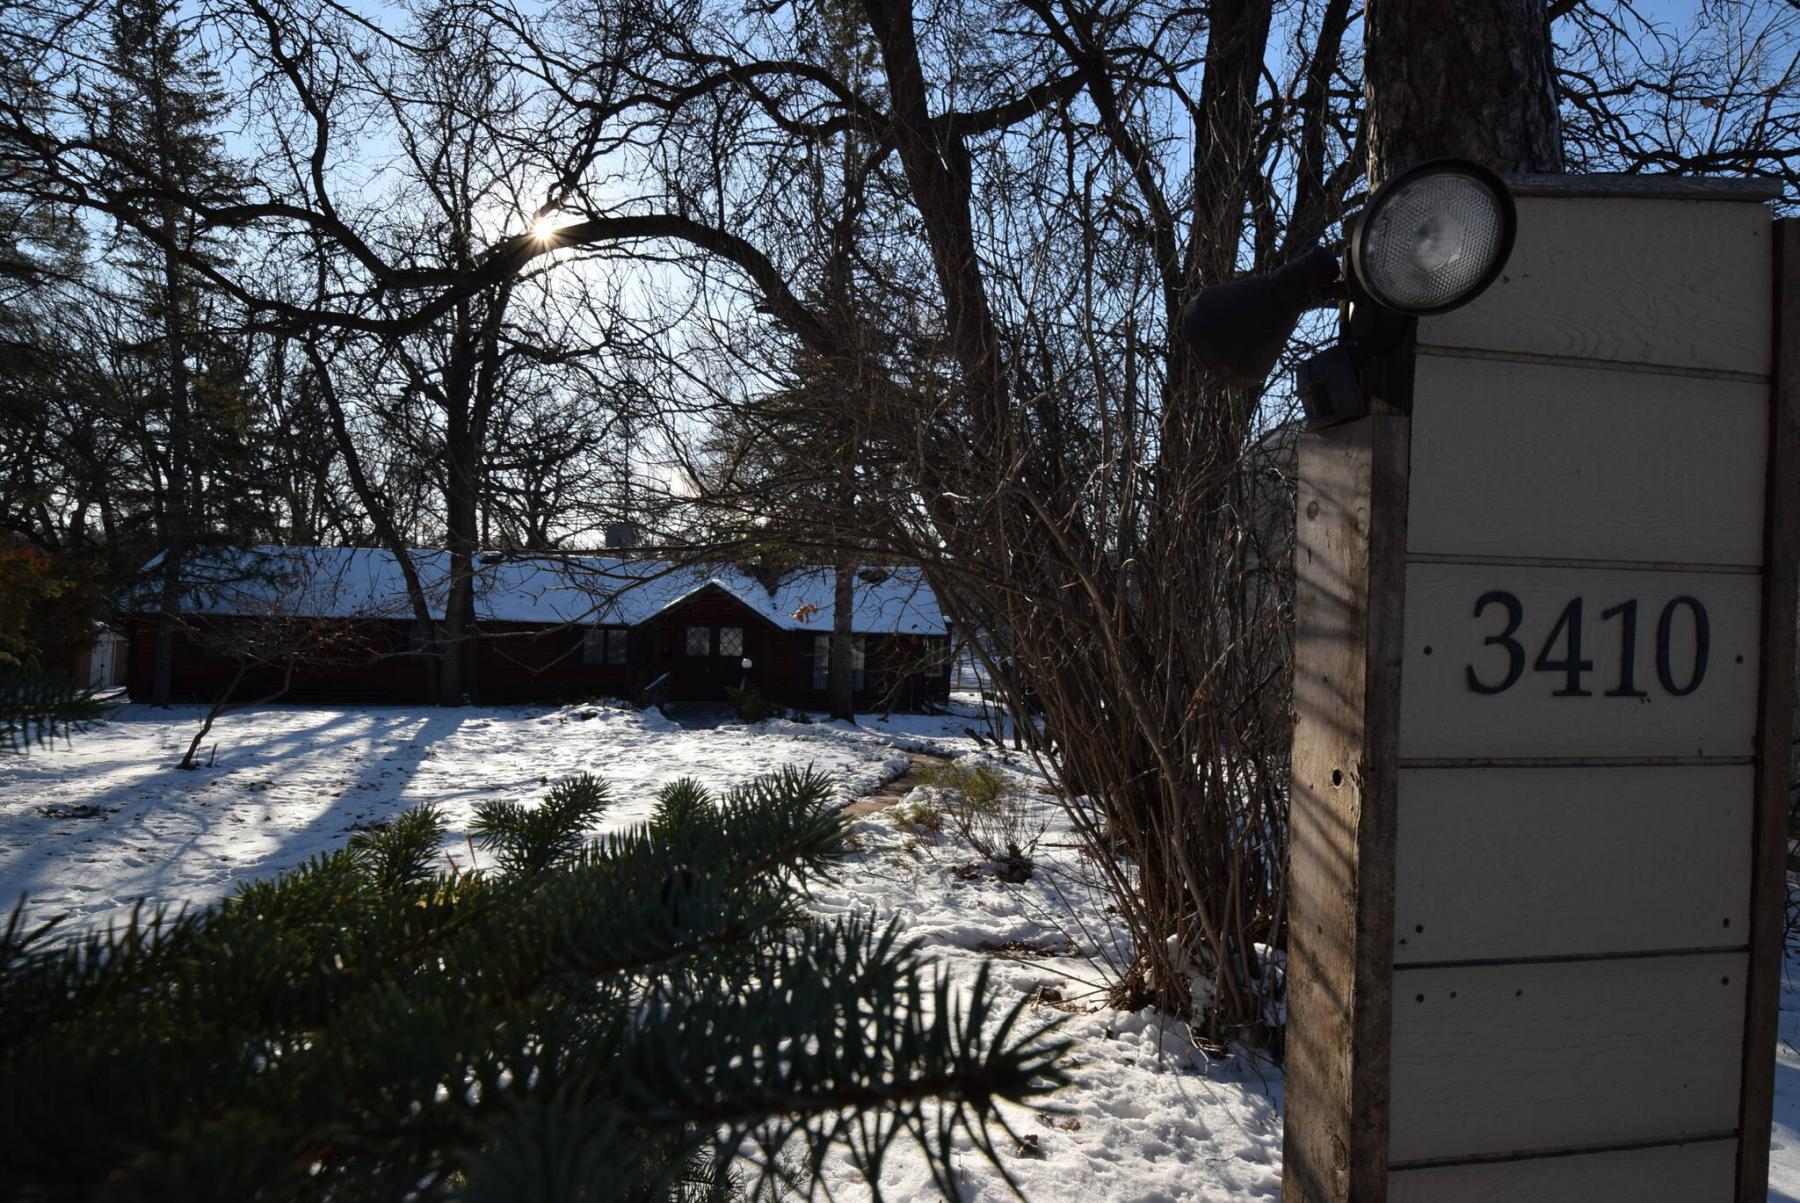 Set well back amid mature trees on a huge riverfront lot, the 1,628-sq.-ft. bungalow offers a cottage-like feel in a quiet spot just minutes from all amenities on Portage Avenue. (Todd Lewys / Winnipeg Free Press)